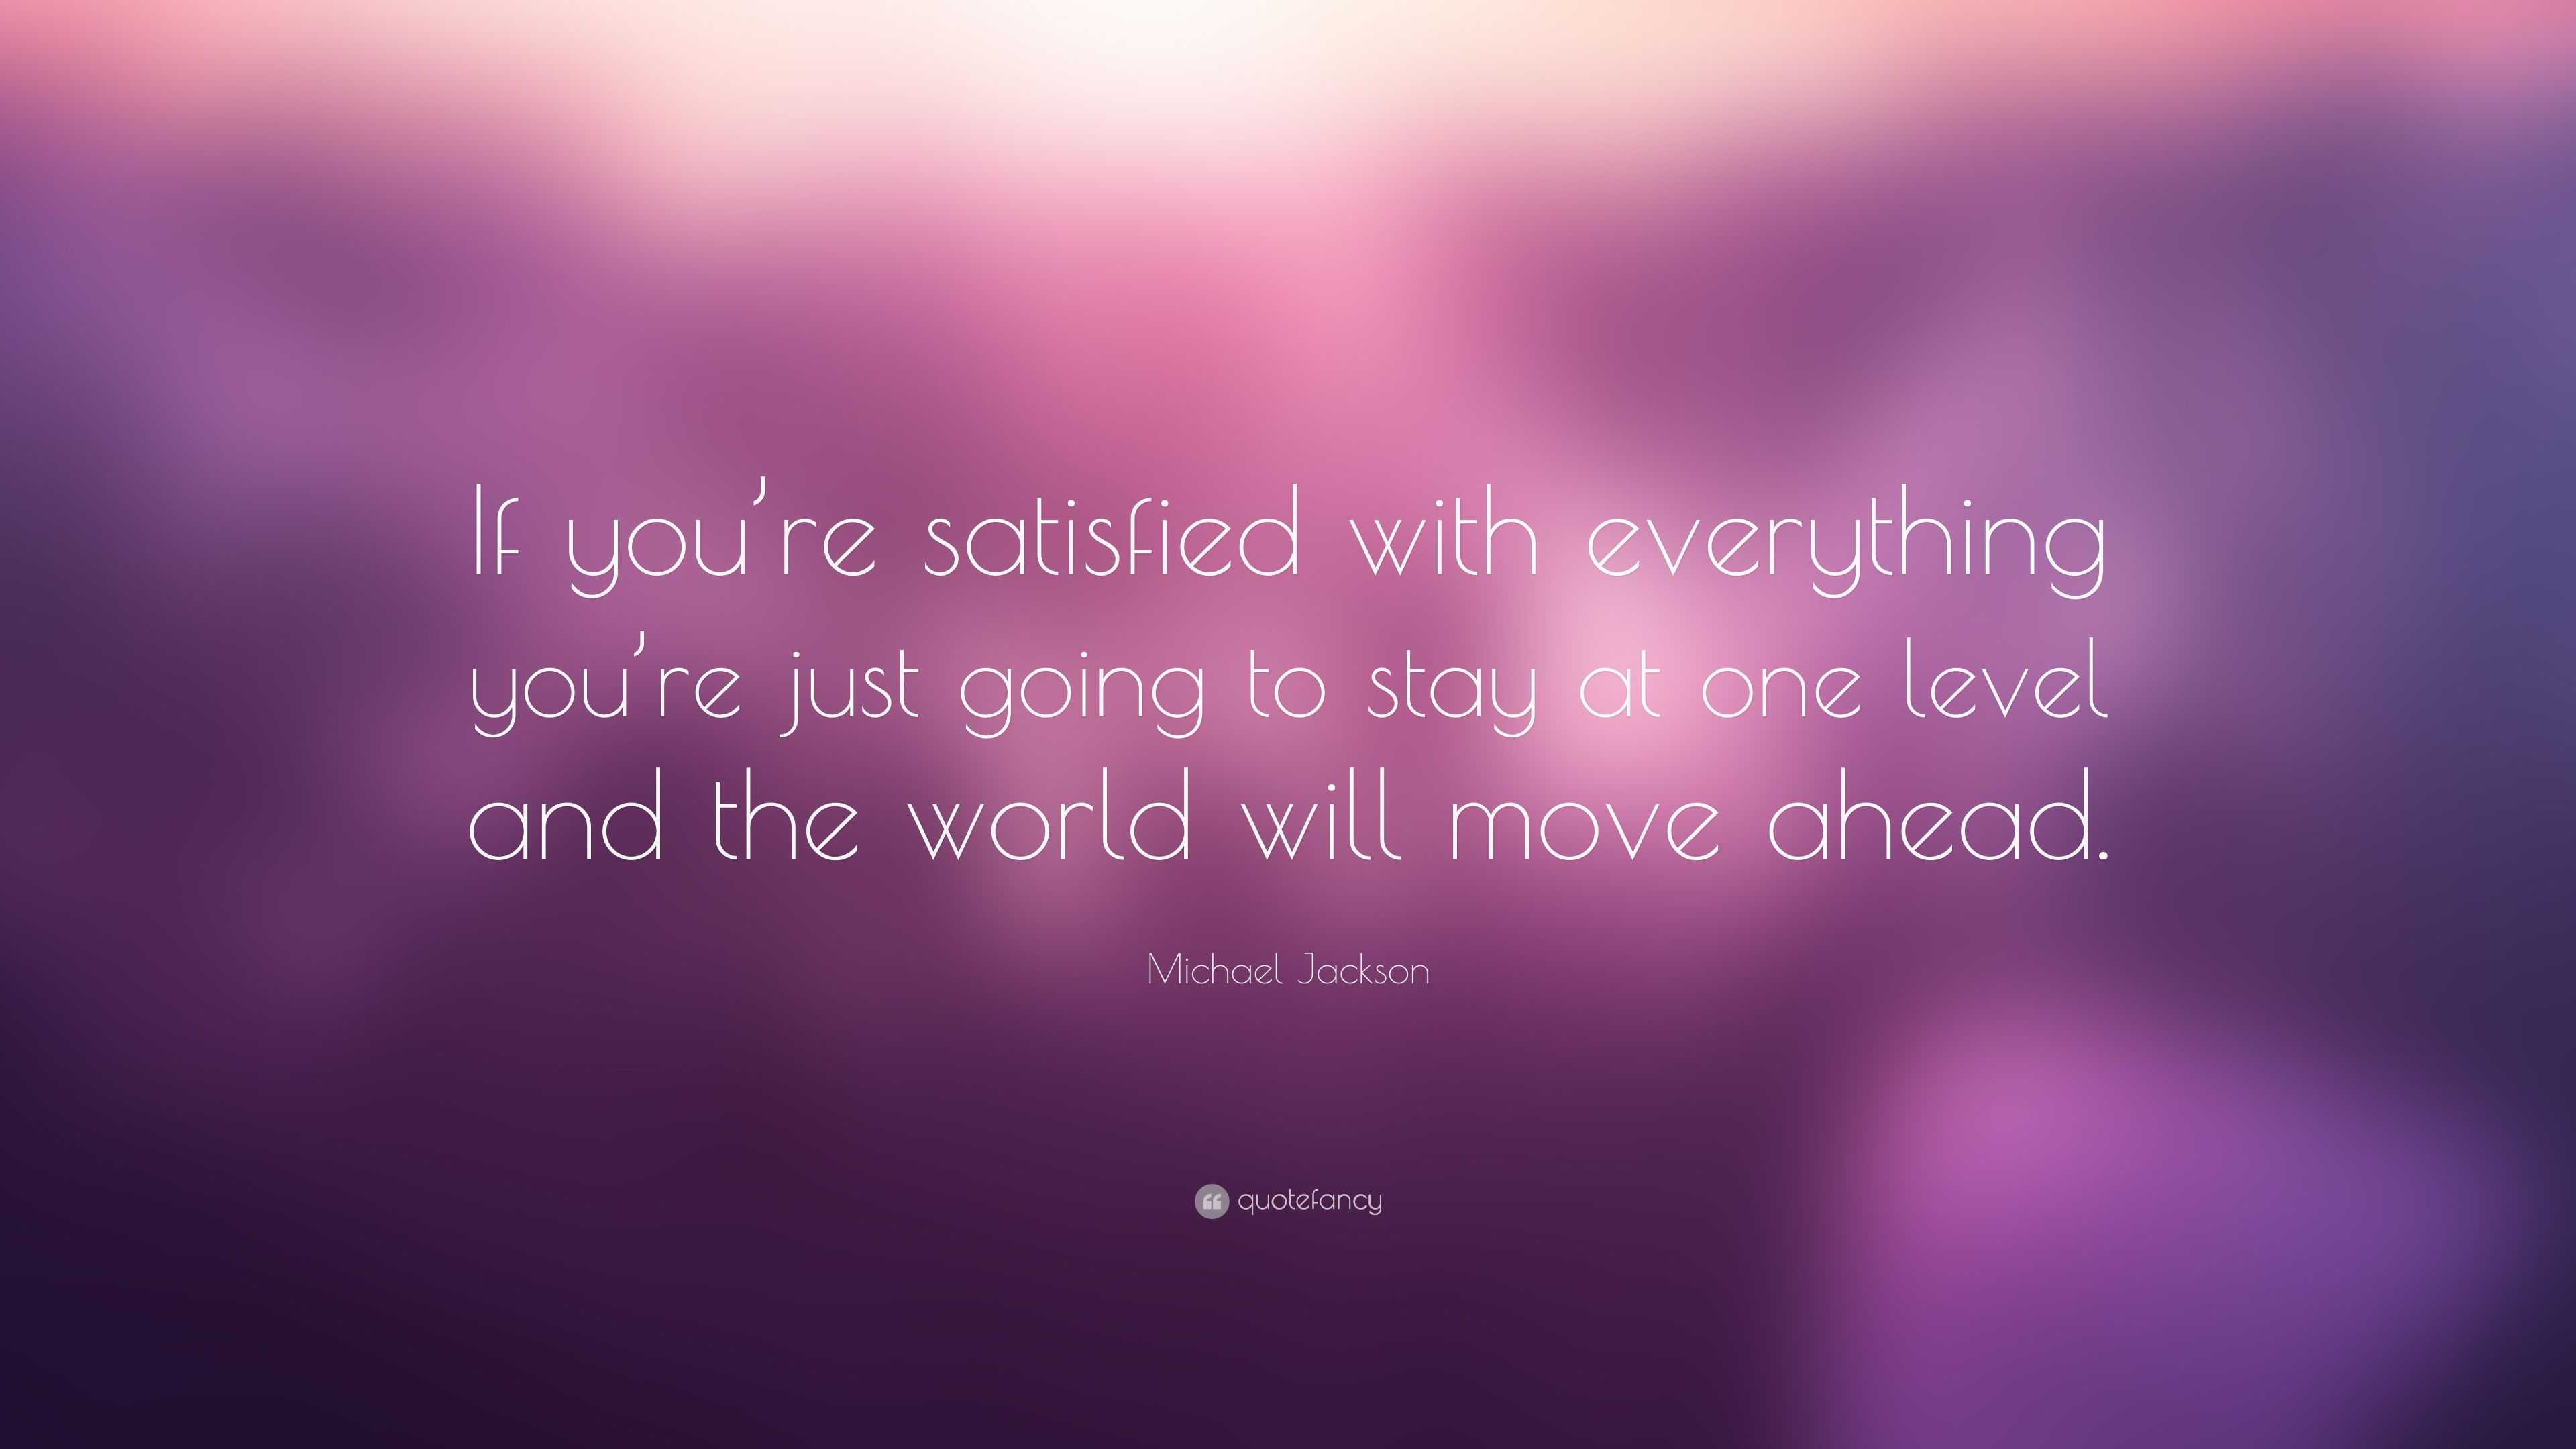 Michael Jackson Quote: “If you’re satisfied with everything you’re just ...